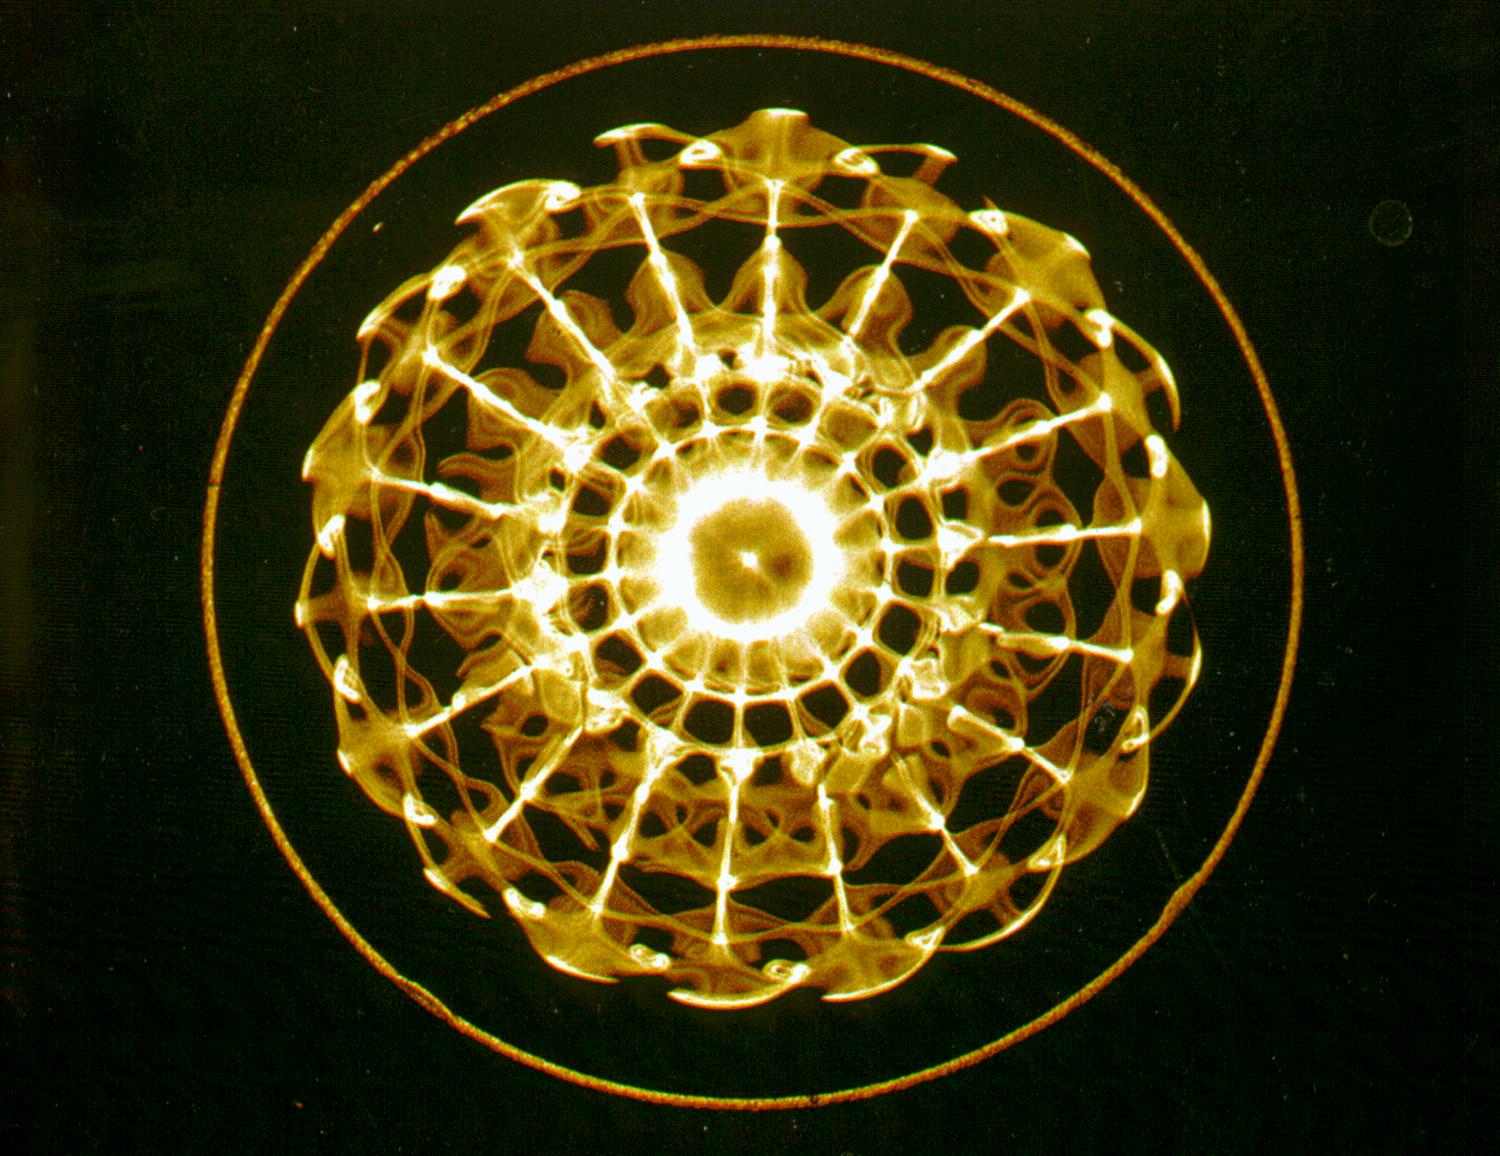 Cymatics: Making the Dance of Frequencies Visible